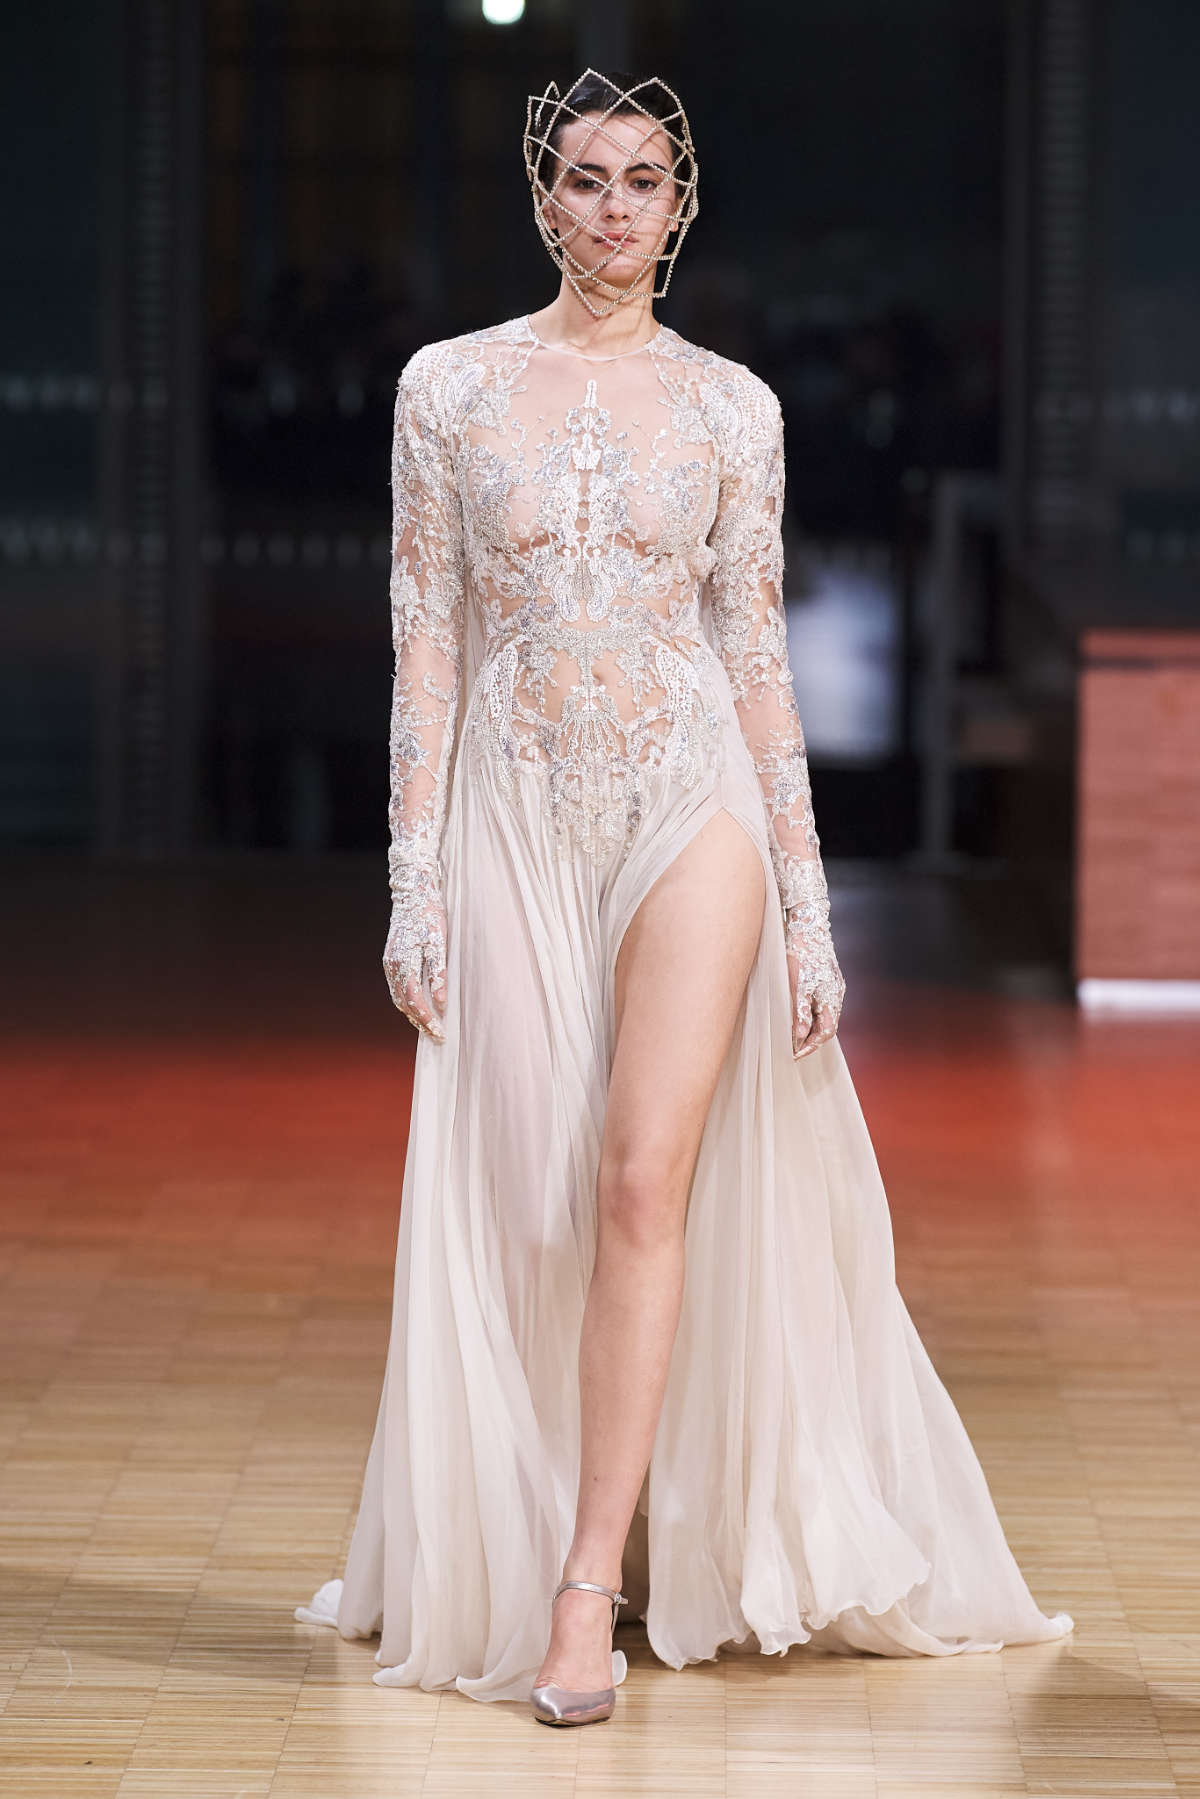 Elie Saab Presents Its New Spring Summer 2022 Haute Couture Collection: Eden On Earth